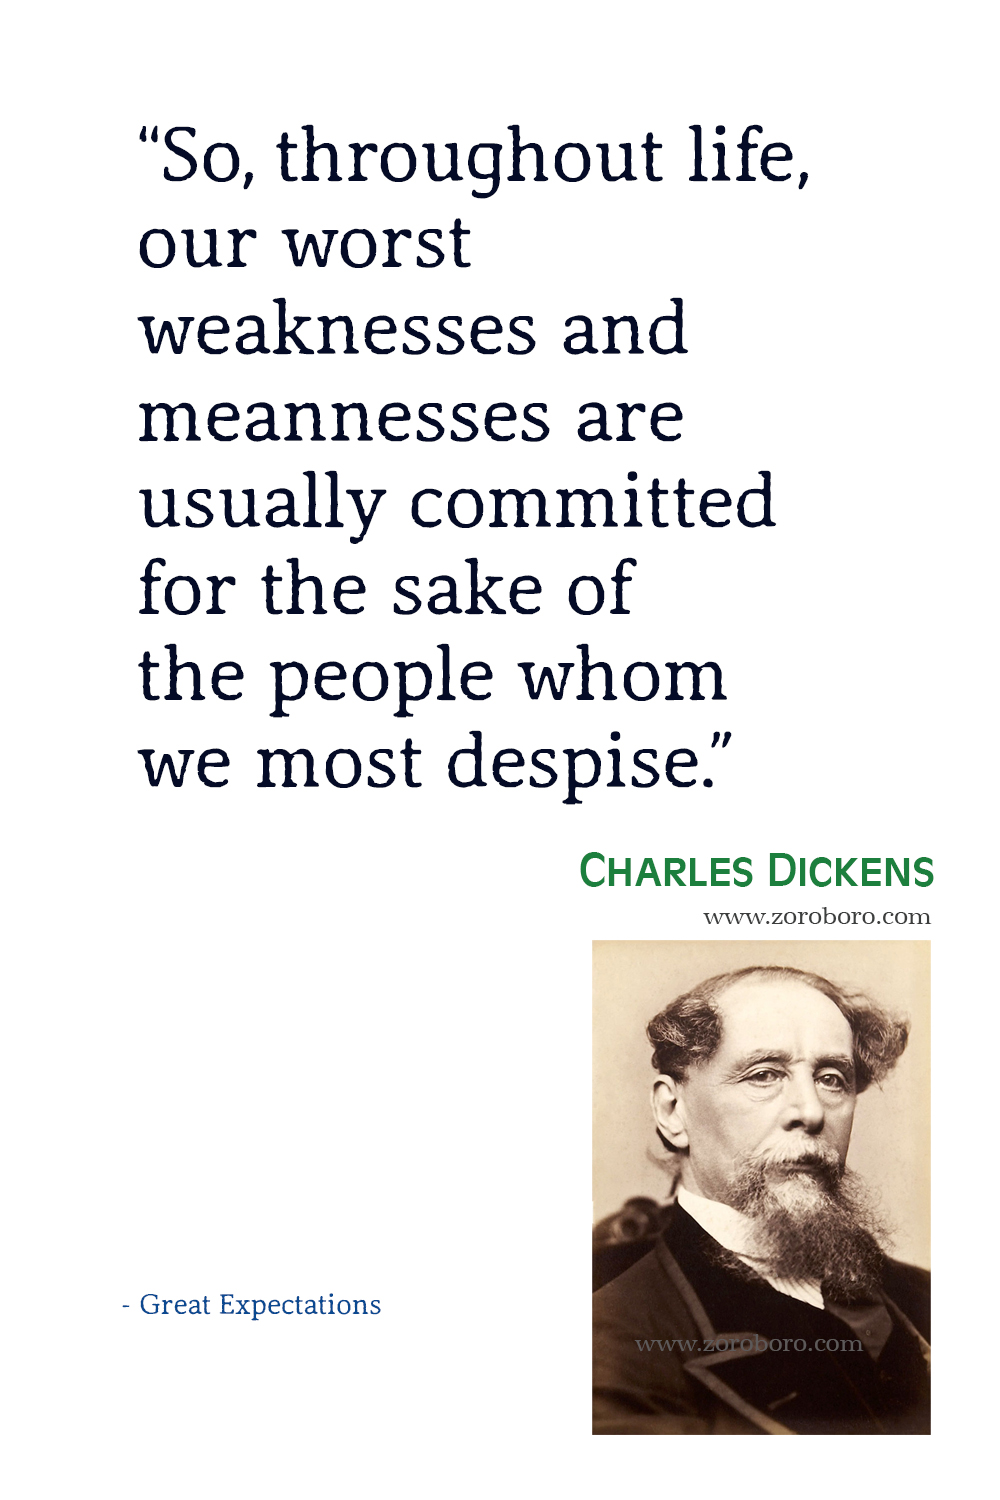 Charles Dickens Quotes, Charles Dickens A Tale of Two Cities Quotes, Charles Dickens Books Quotes, Charles Dickens Great Expectations Quotes